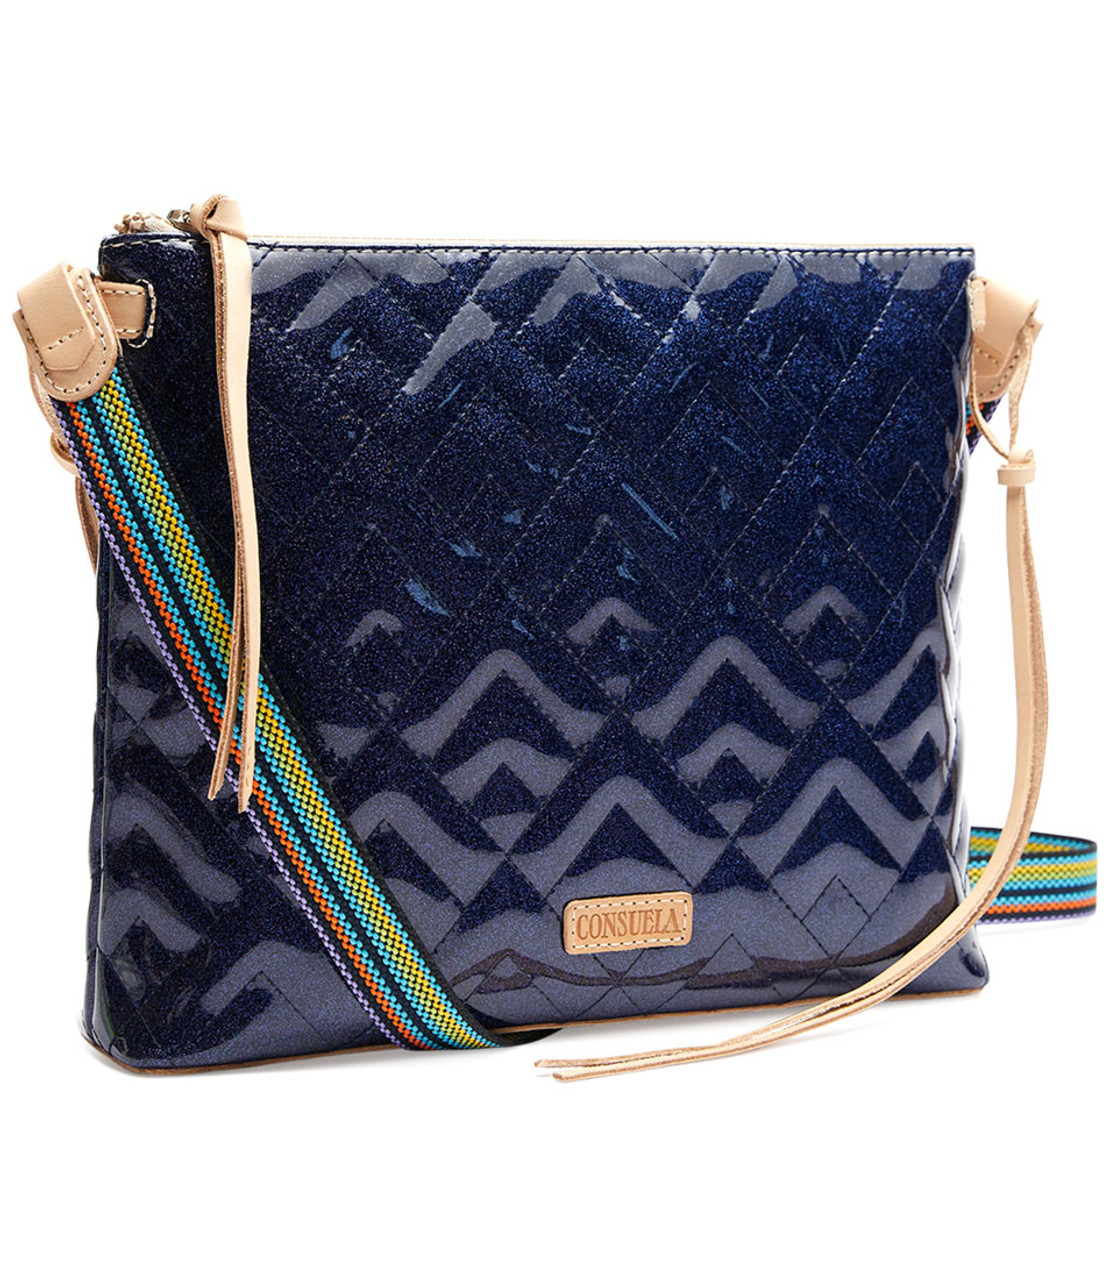 LUXE DOWNTOWN CROSSBODY – The Girls Room